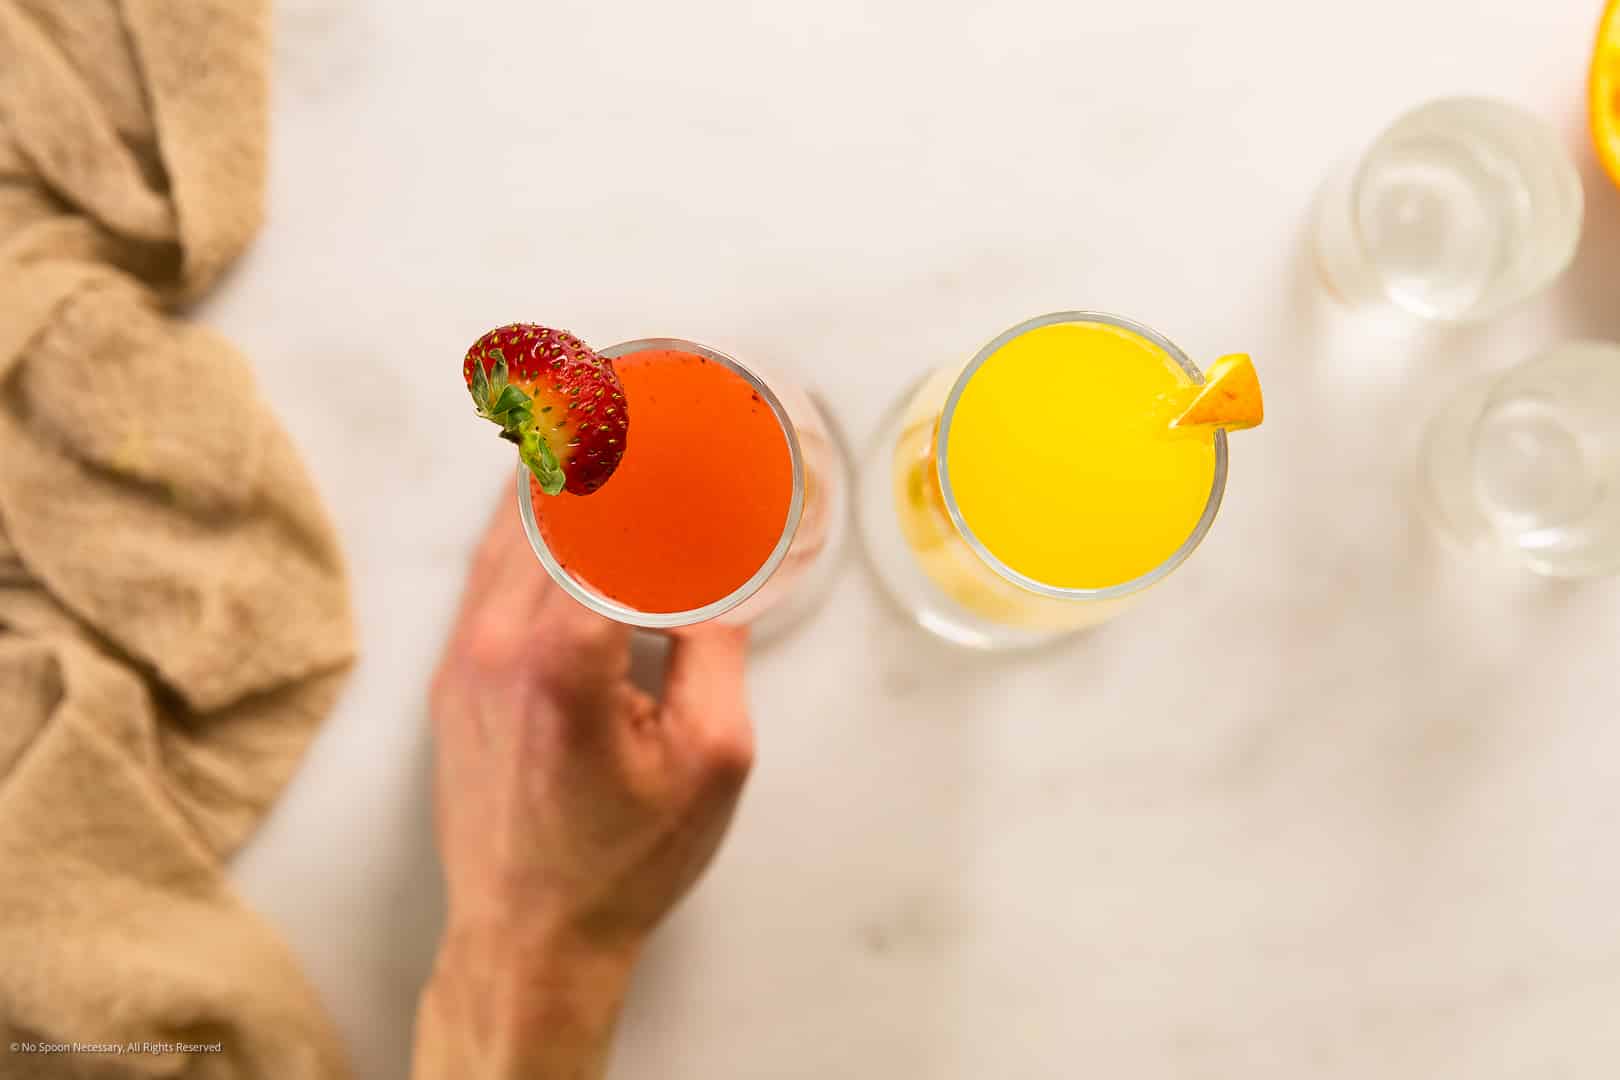 How to Make the Perfect Mimosa - foodiecrush .com